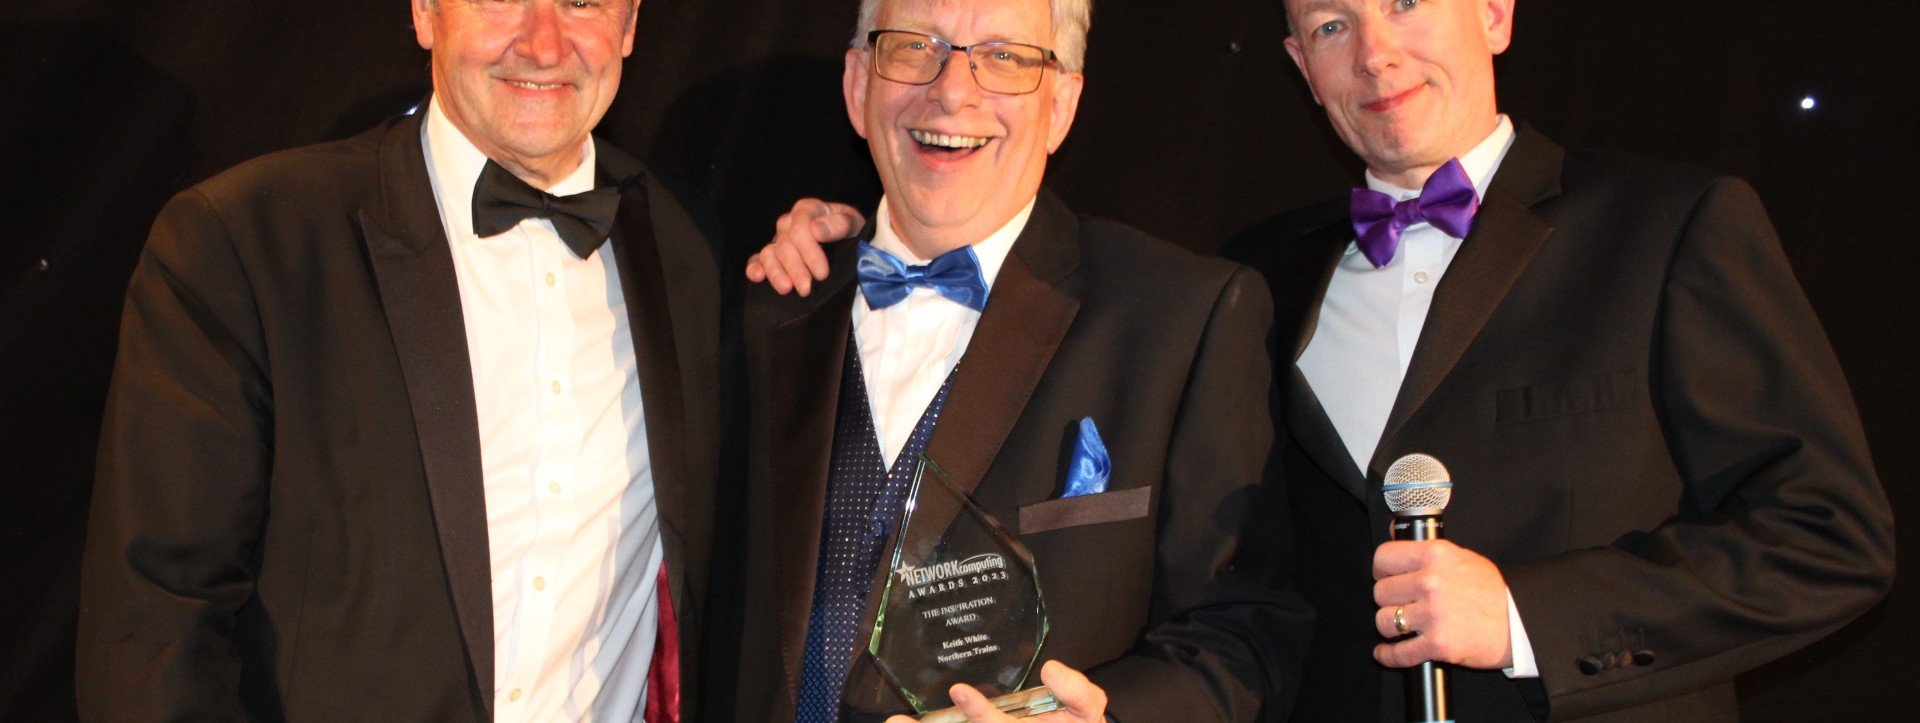 image-shows-keith-white-centre-picking-up-his-inspiration-award